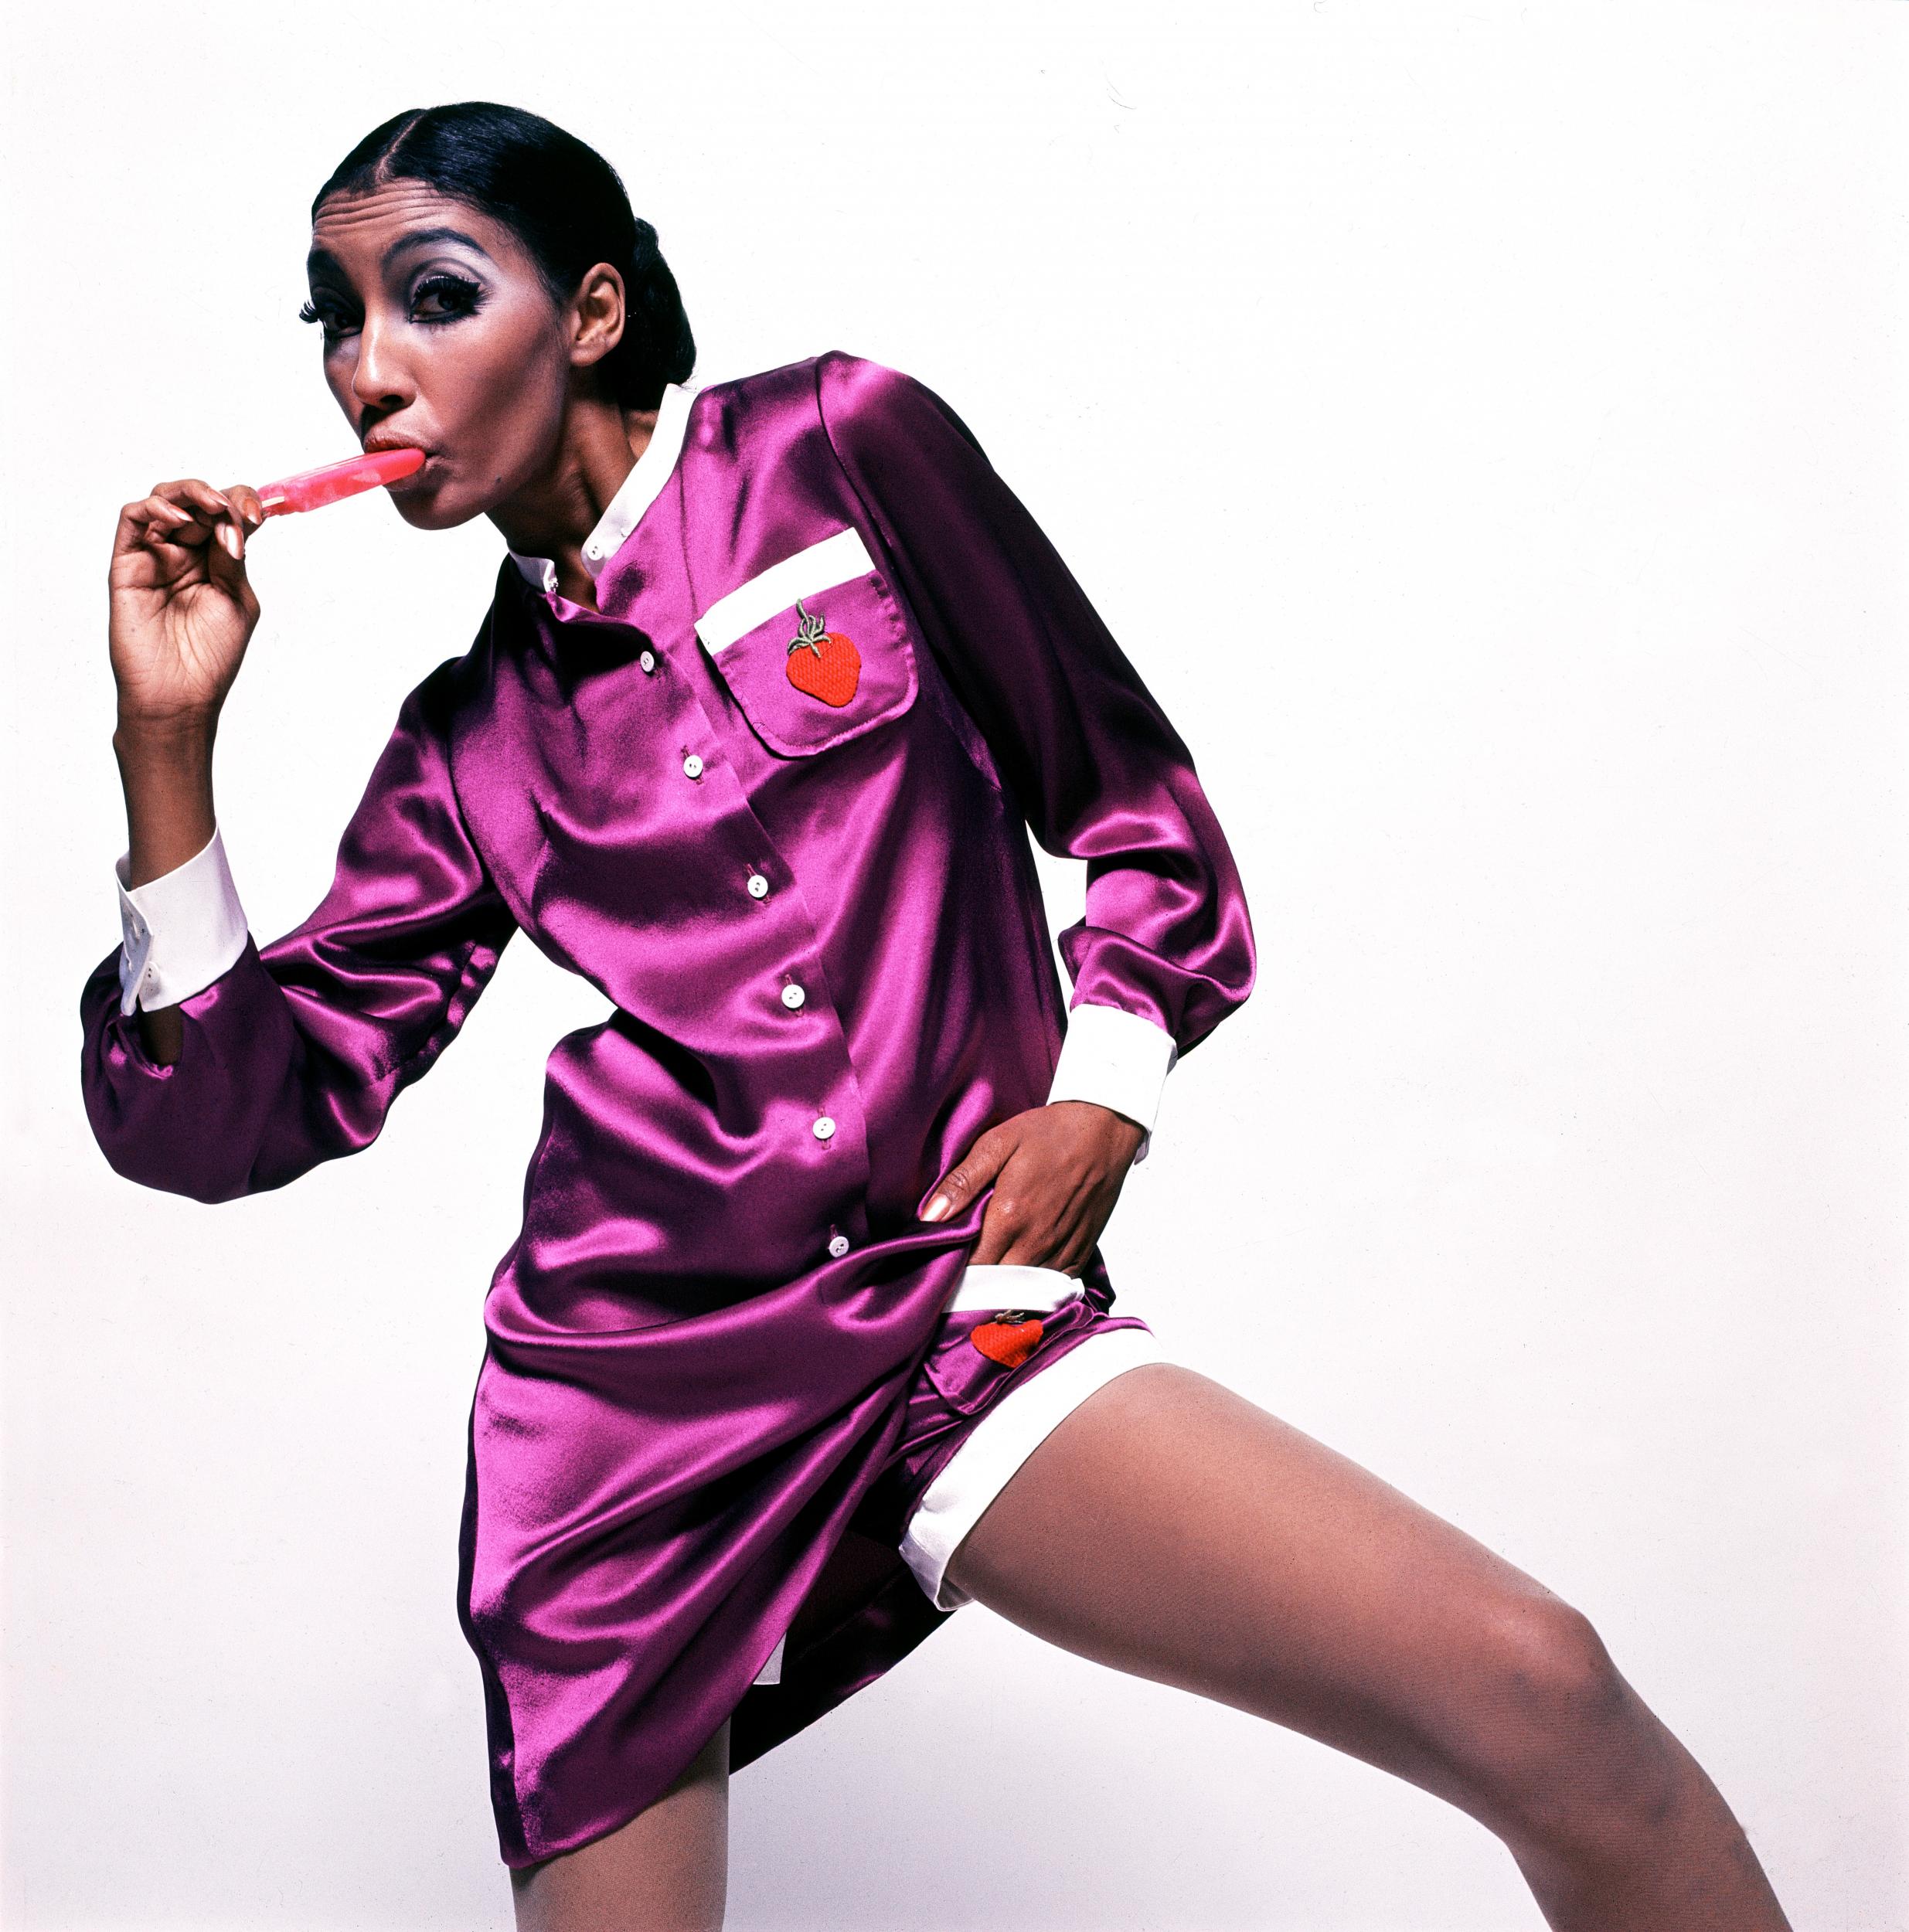 Satin mini-dress and shorts by Quant, photographed by Brian Duffy in 1966 (Duffy Archive )